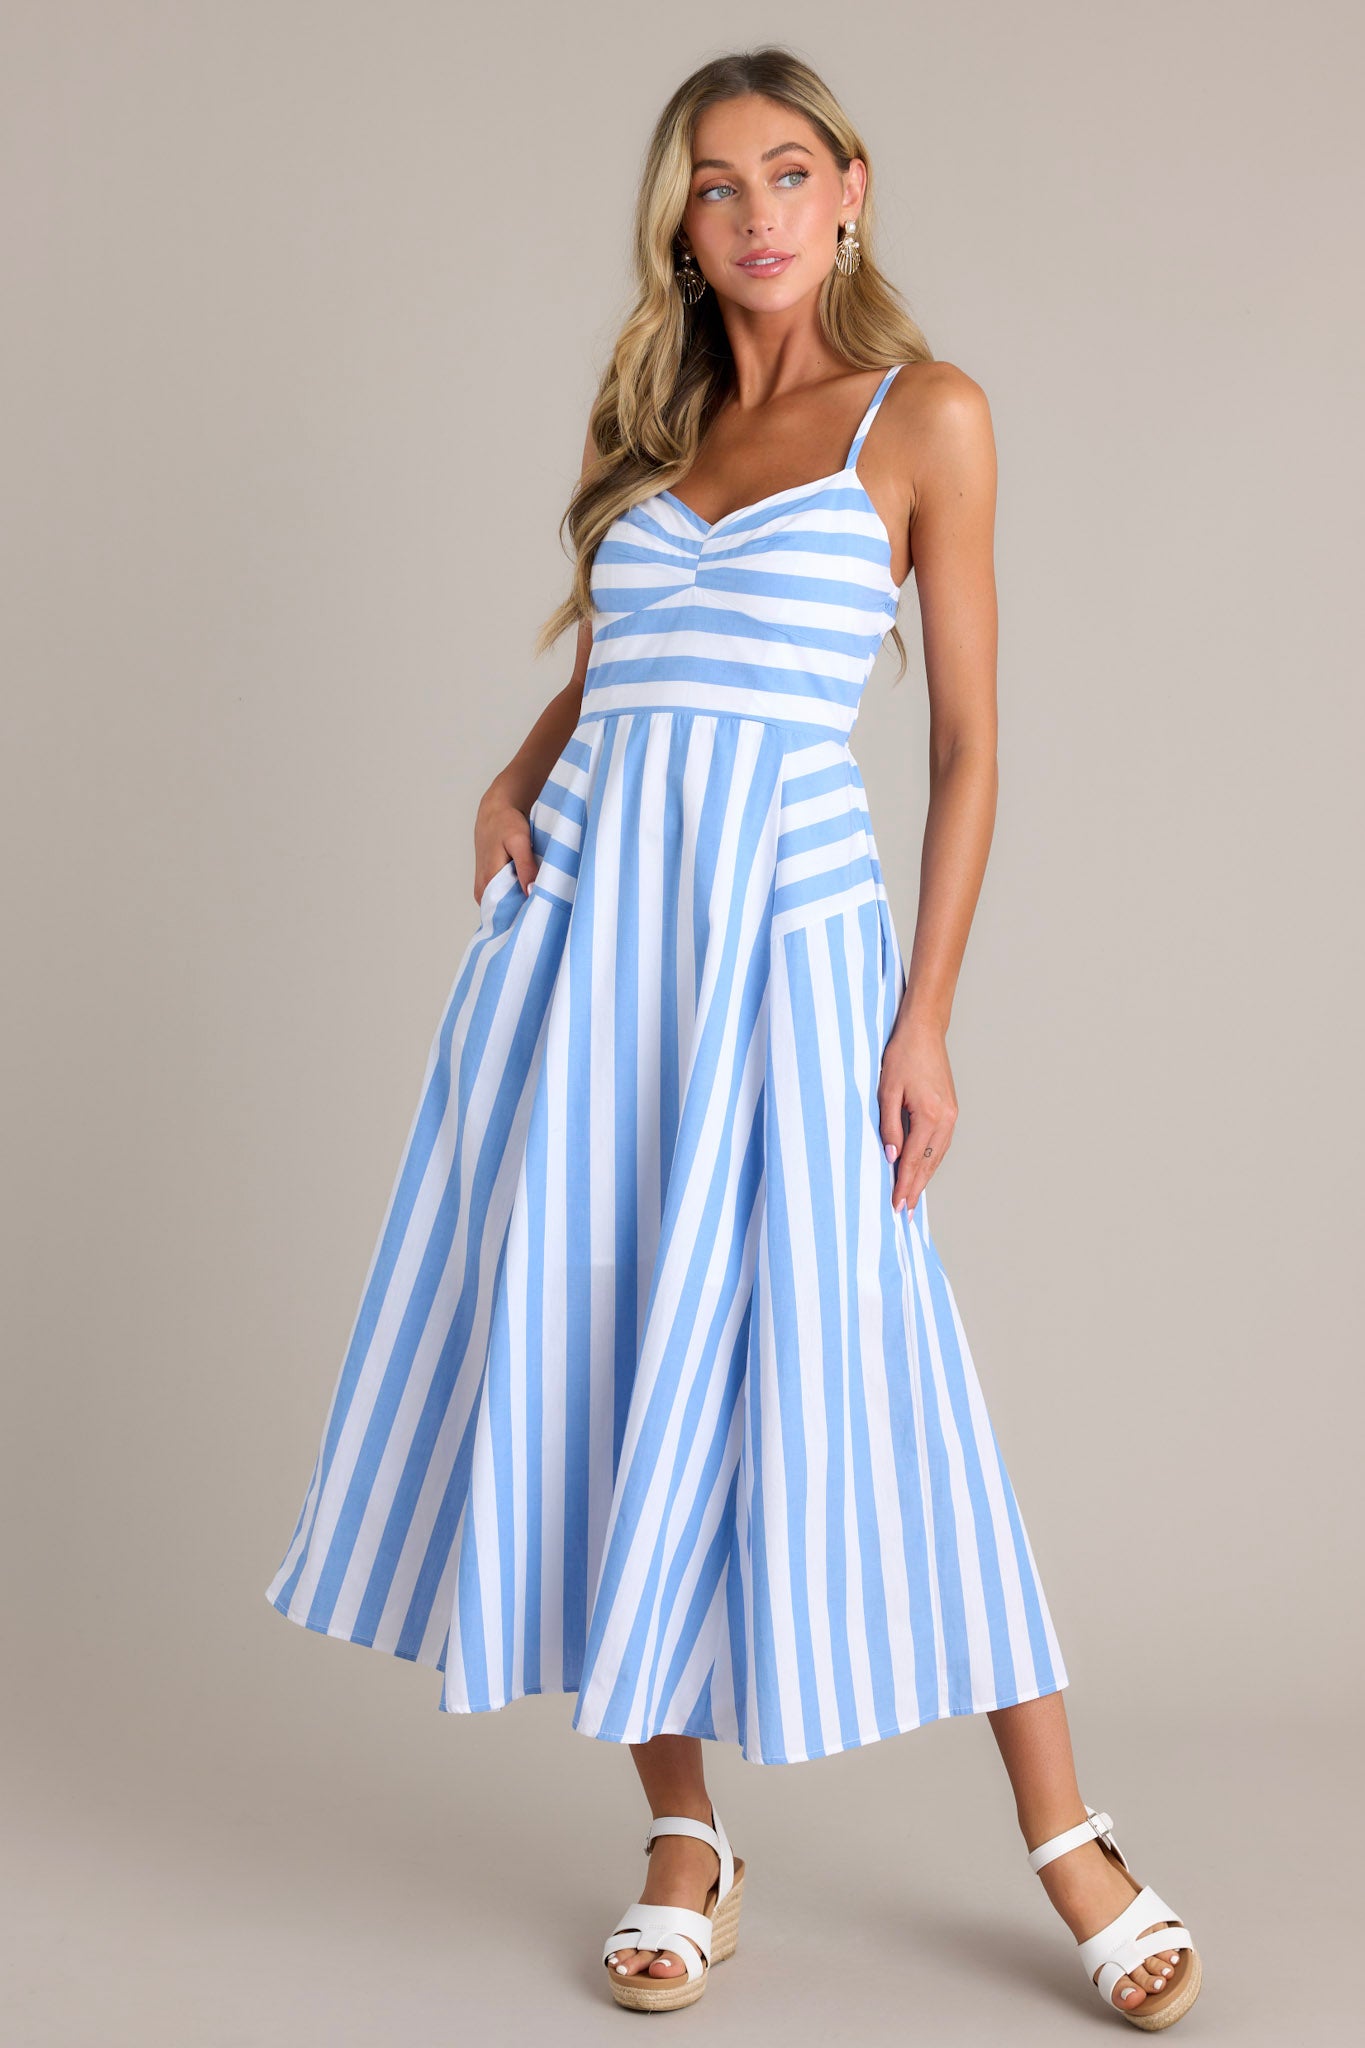 This blue stripe midi dress features a sweetheart neckline, thin adjustable straps, a fully smocked back, functional hip pockets, and a unique striped pattern.